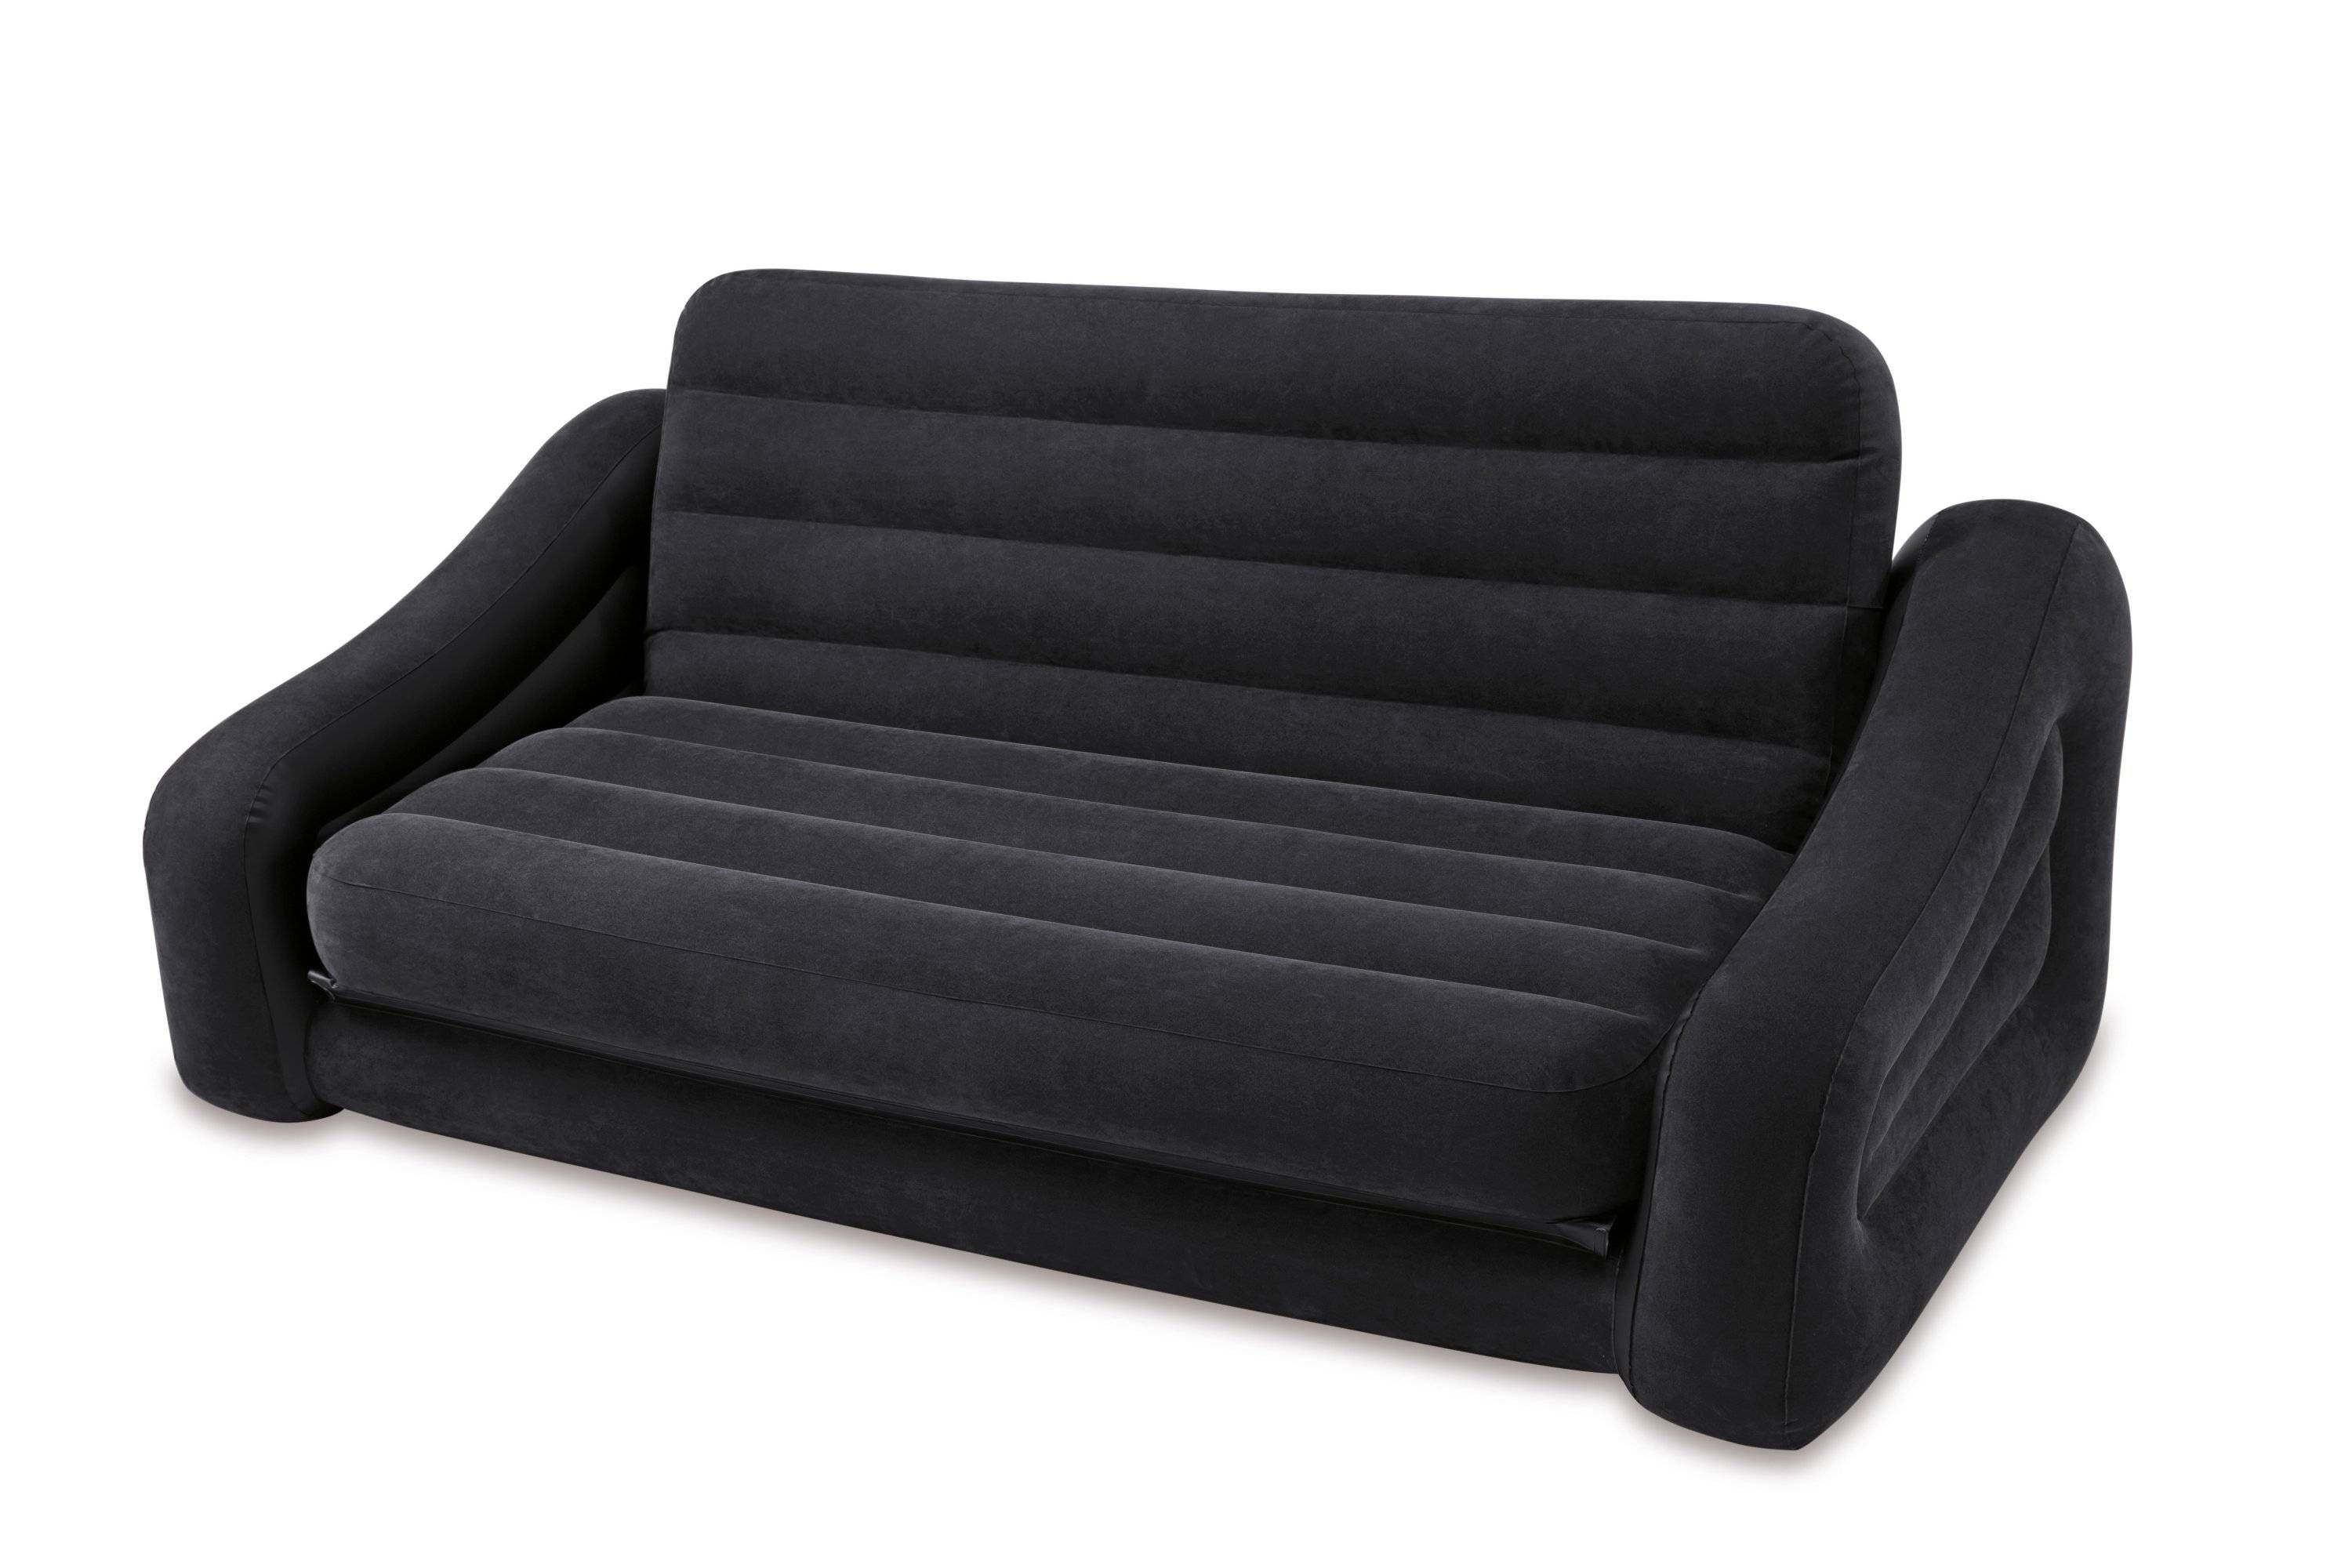 Intex Inflatable Pull Out Sofa Queen Bed Sleeper 68566ep + 66619e Regarding Intex Air Couches (View 10 of 15)